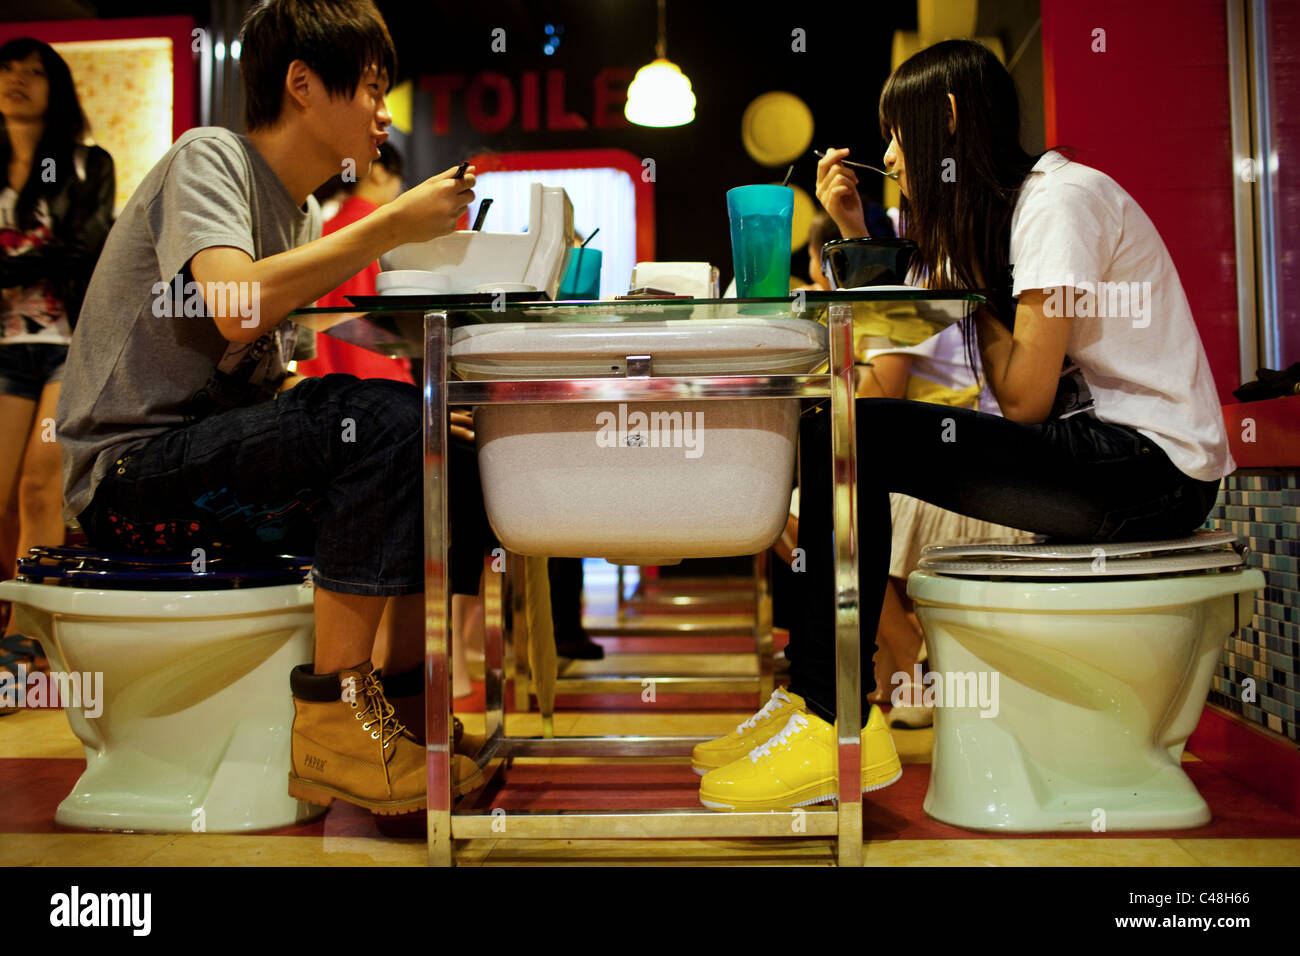 Modern Toilet Restaurant Taiwan High Resolution Stock Photography and  Images - Alamy